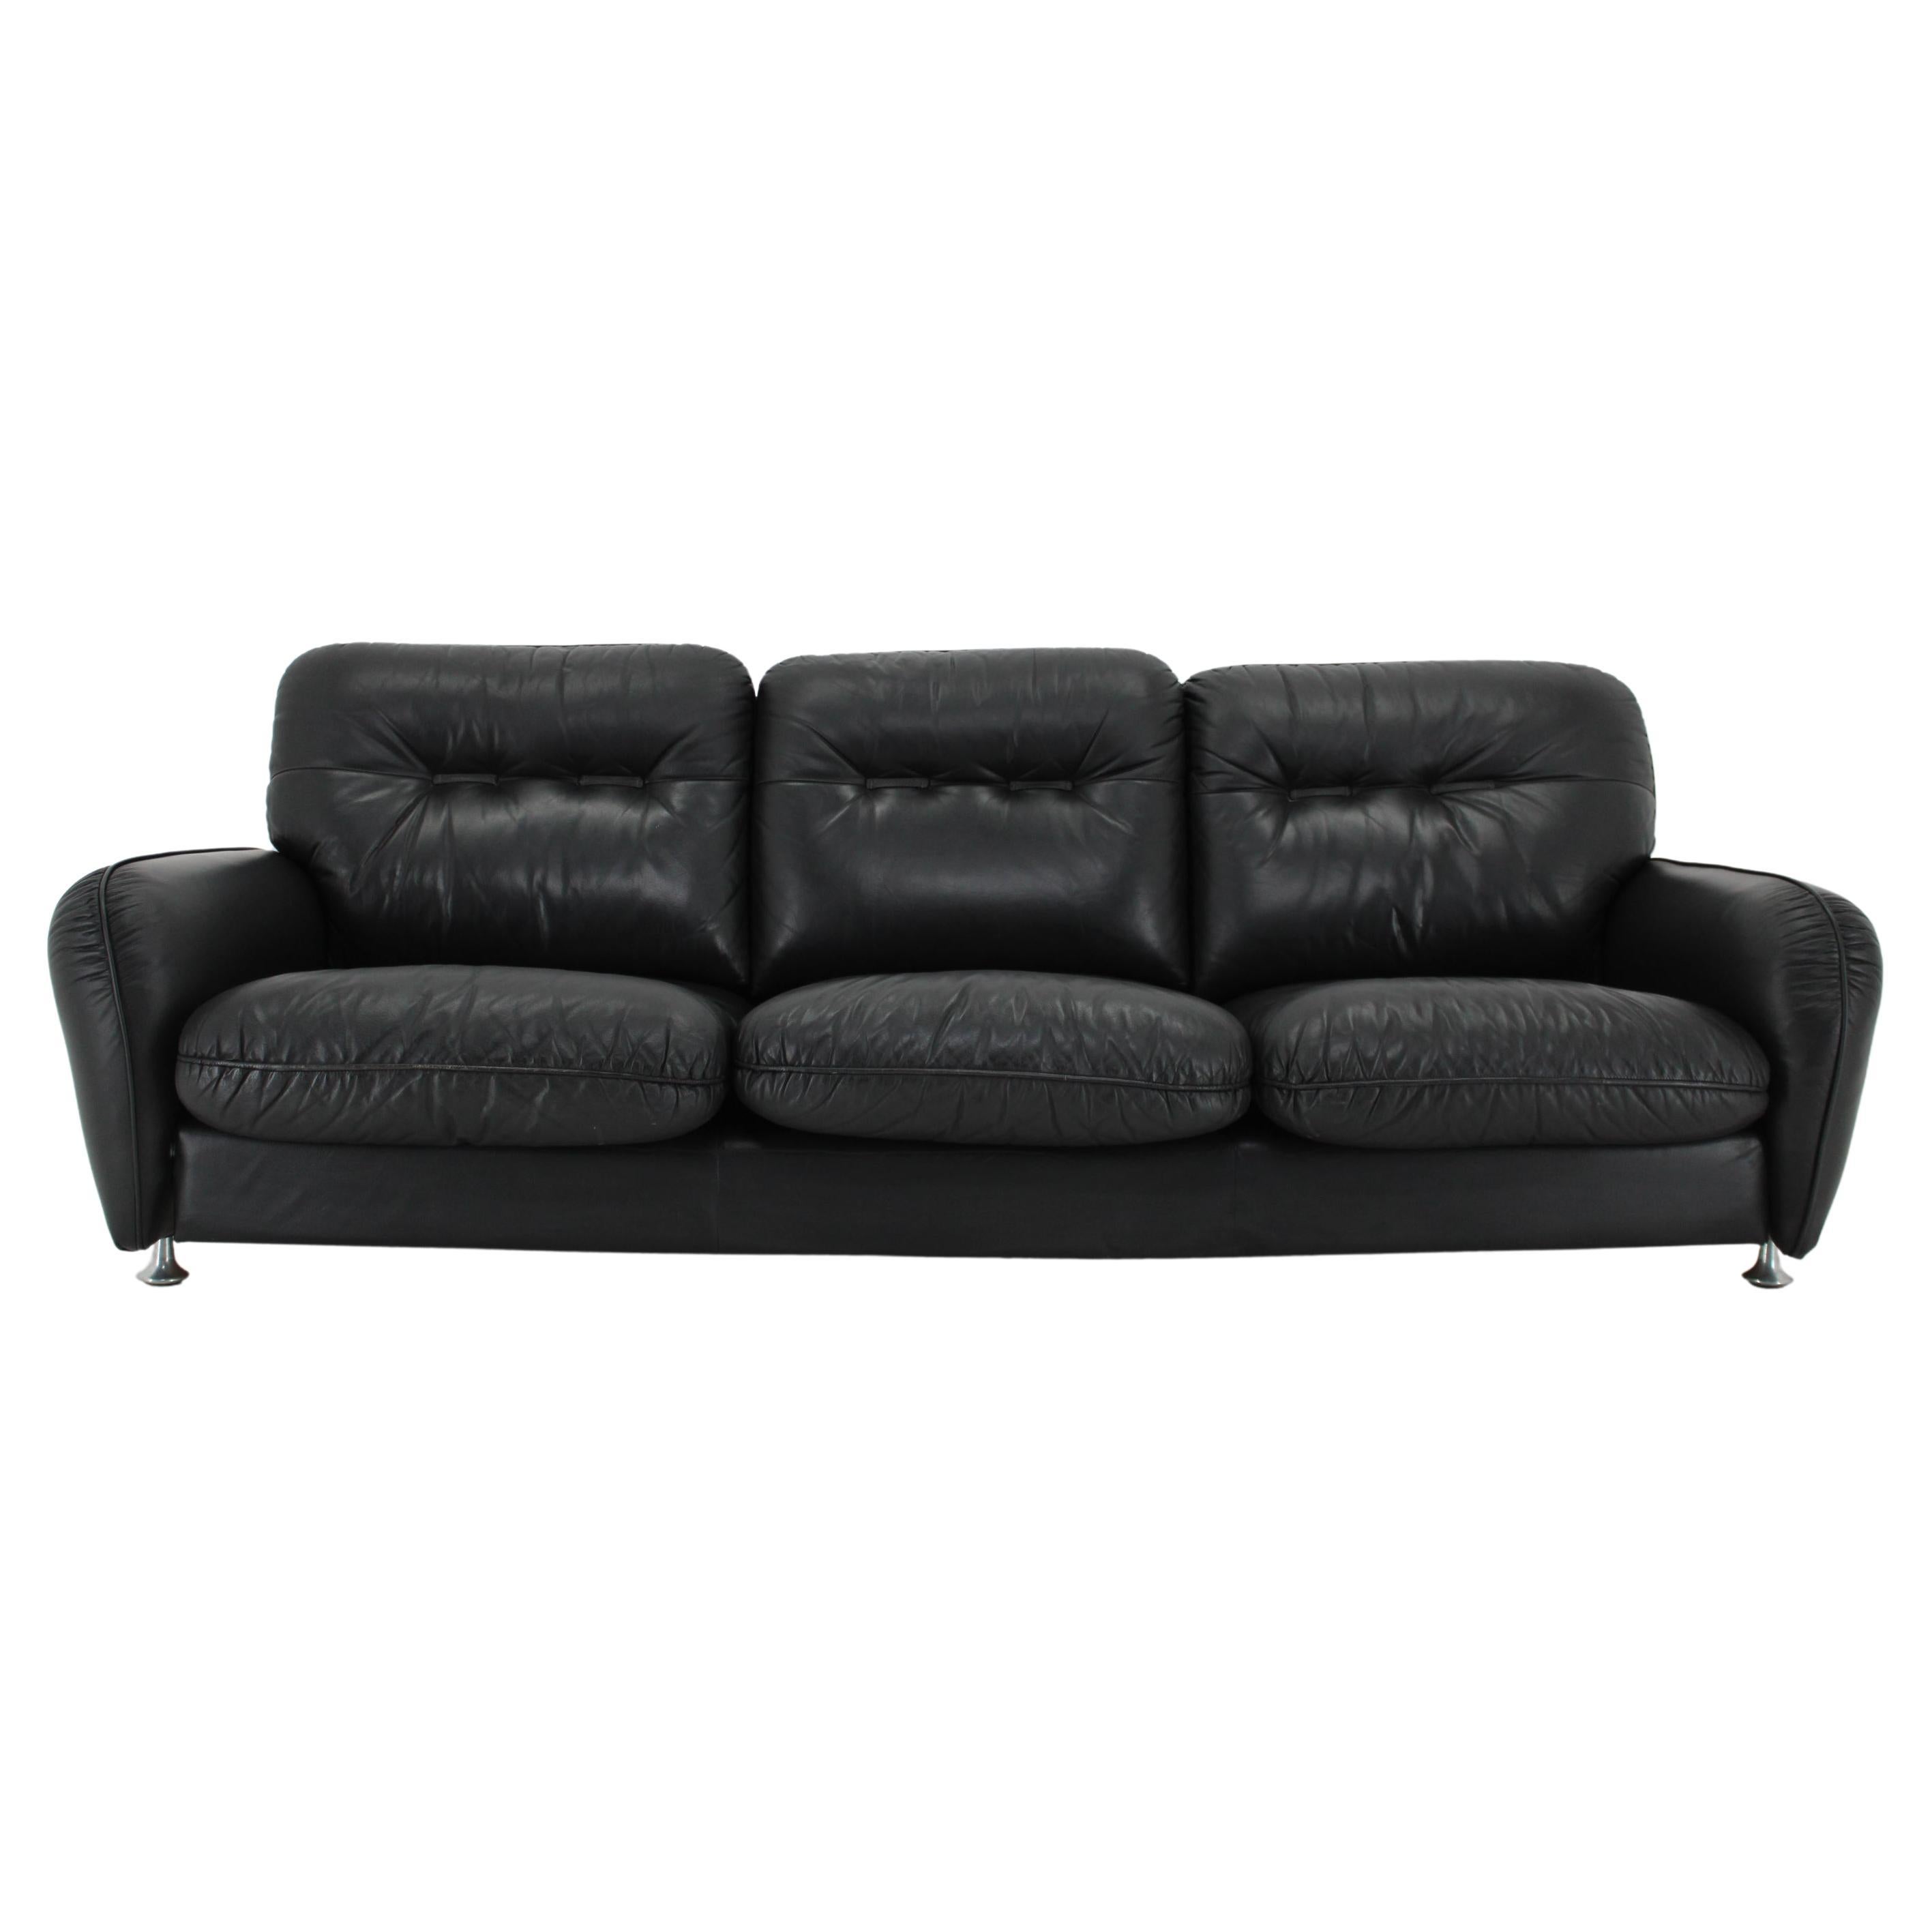 1970s 3-Seater Sofa in Black Leather, Italy For Sale